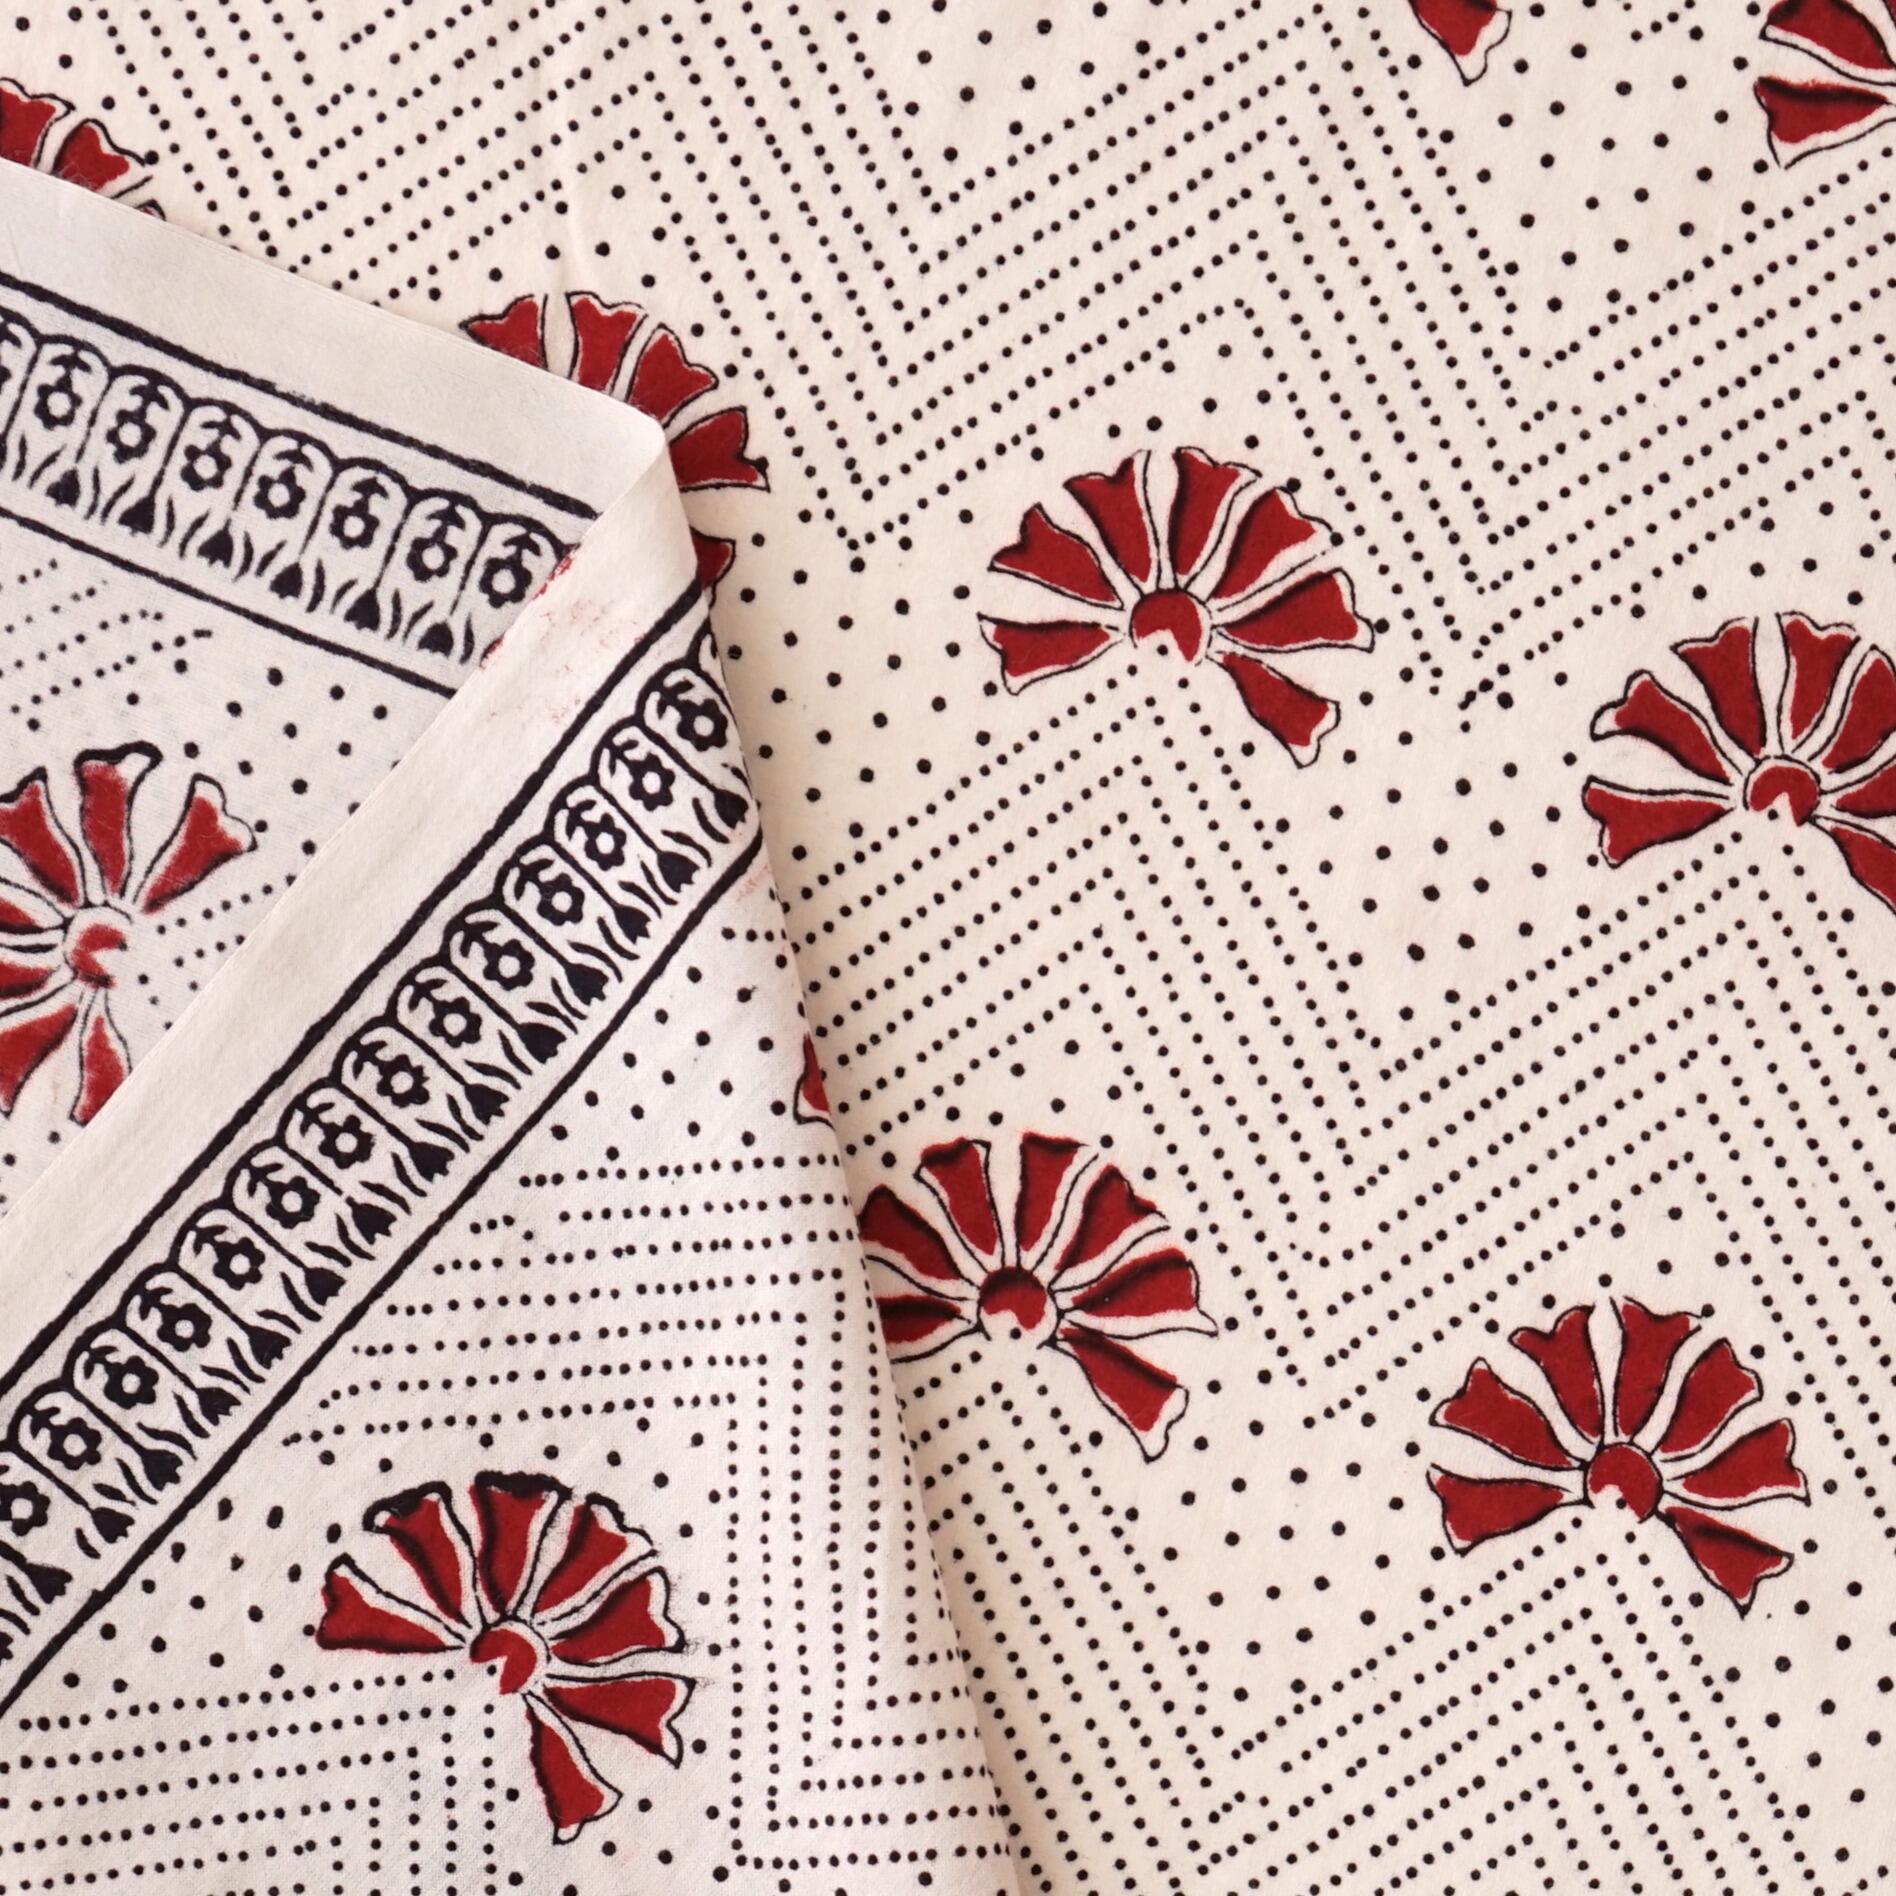 100% Block-Printed Cotton Fabric From Bagh, India - Escape to the Beach - Iron Rust Black & Alizarin Red Dyes - Selvedge